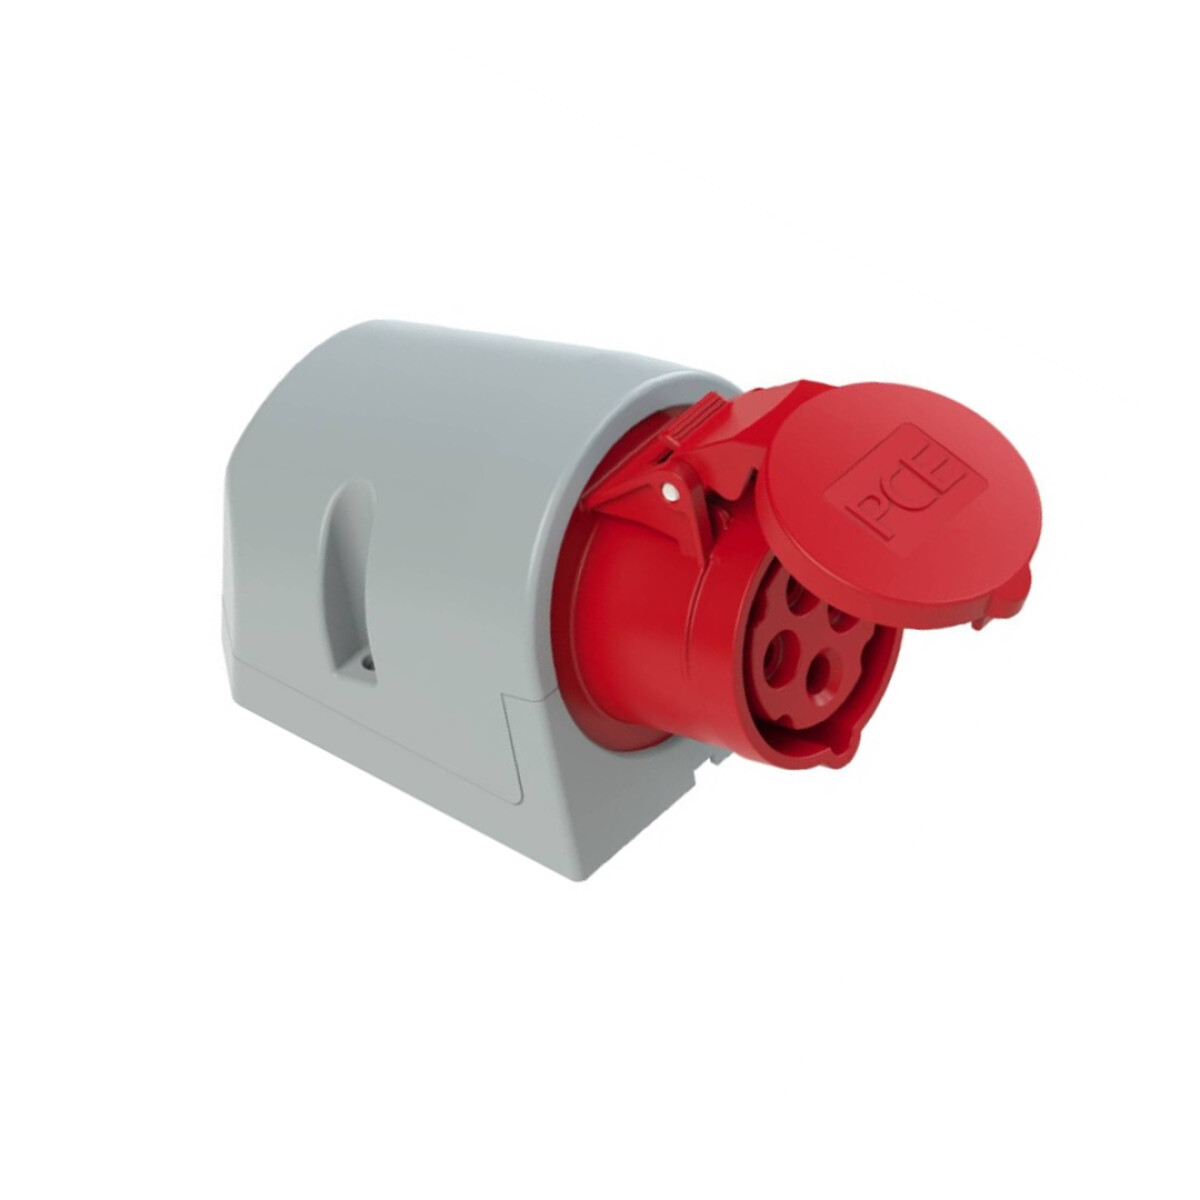 PCE Toma Pared - IP-44 380/440V H6 rojo 16A 3P+T 